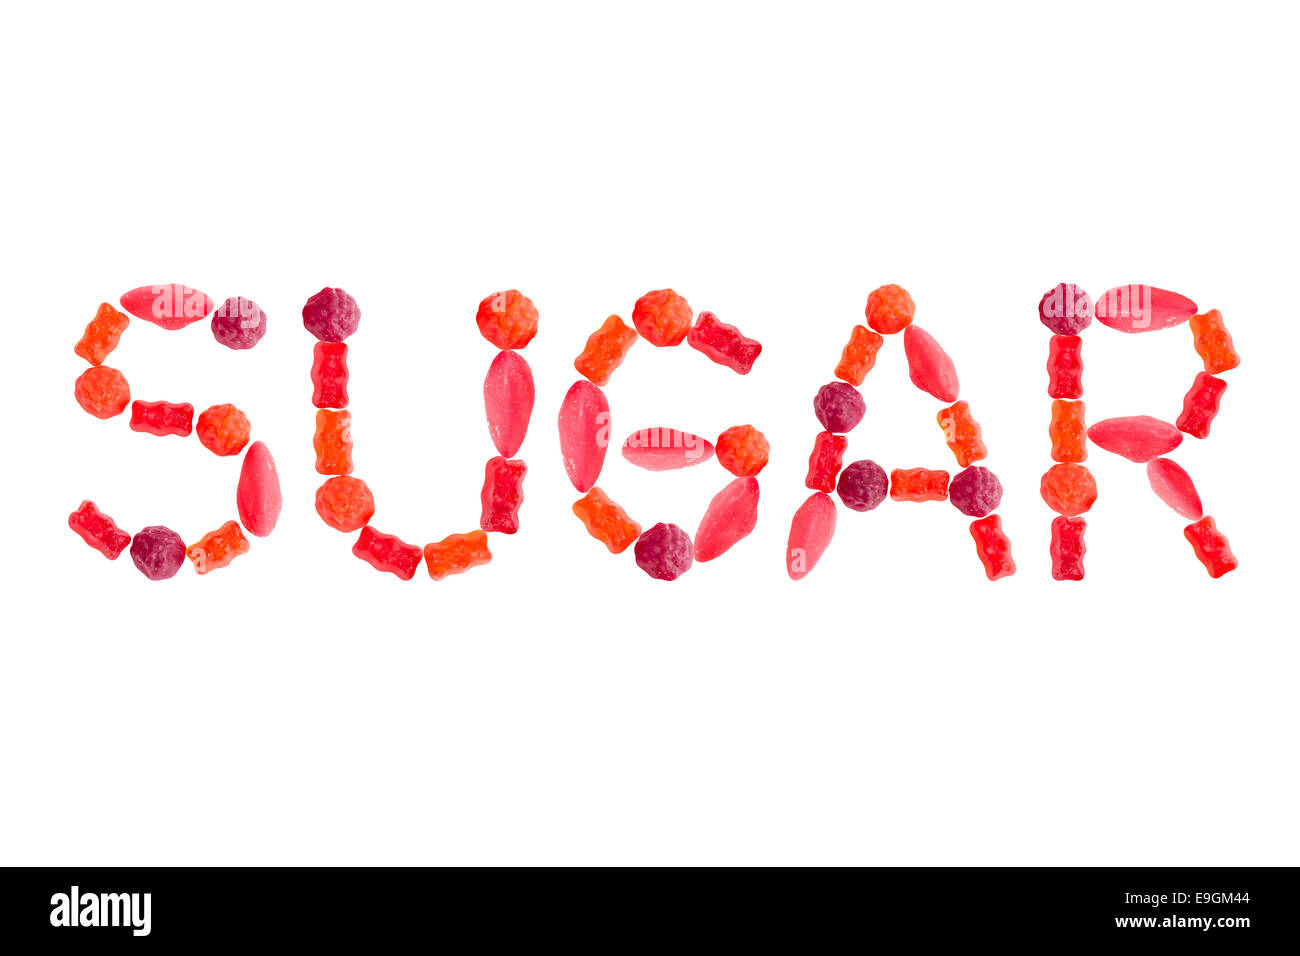 Word SUGAR made of red sugary candies, isolated on white background Stock Photo